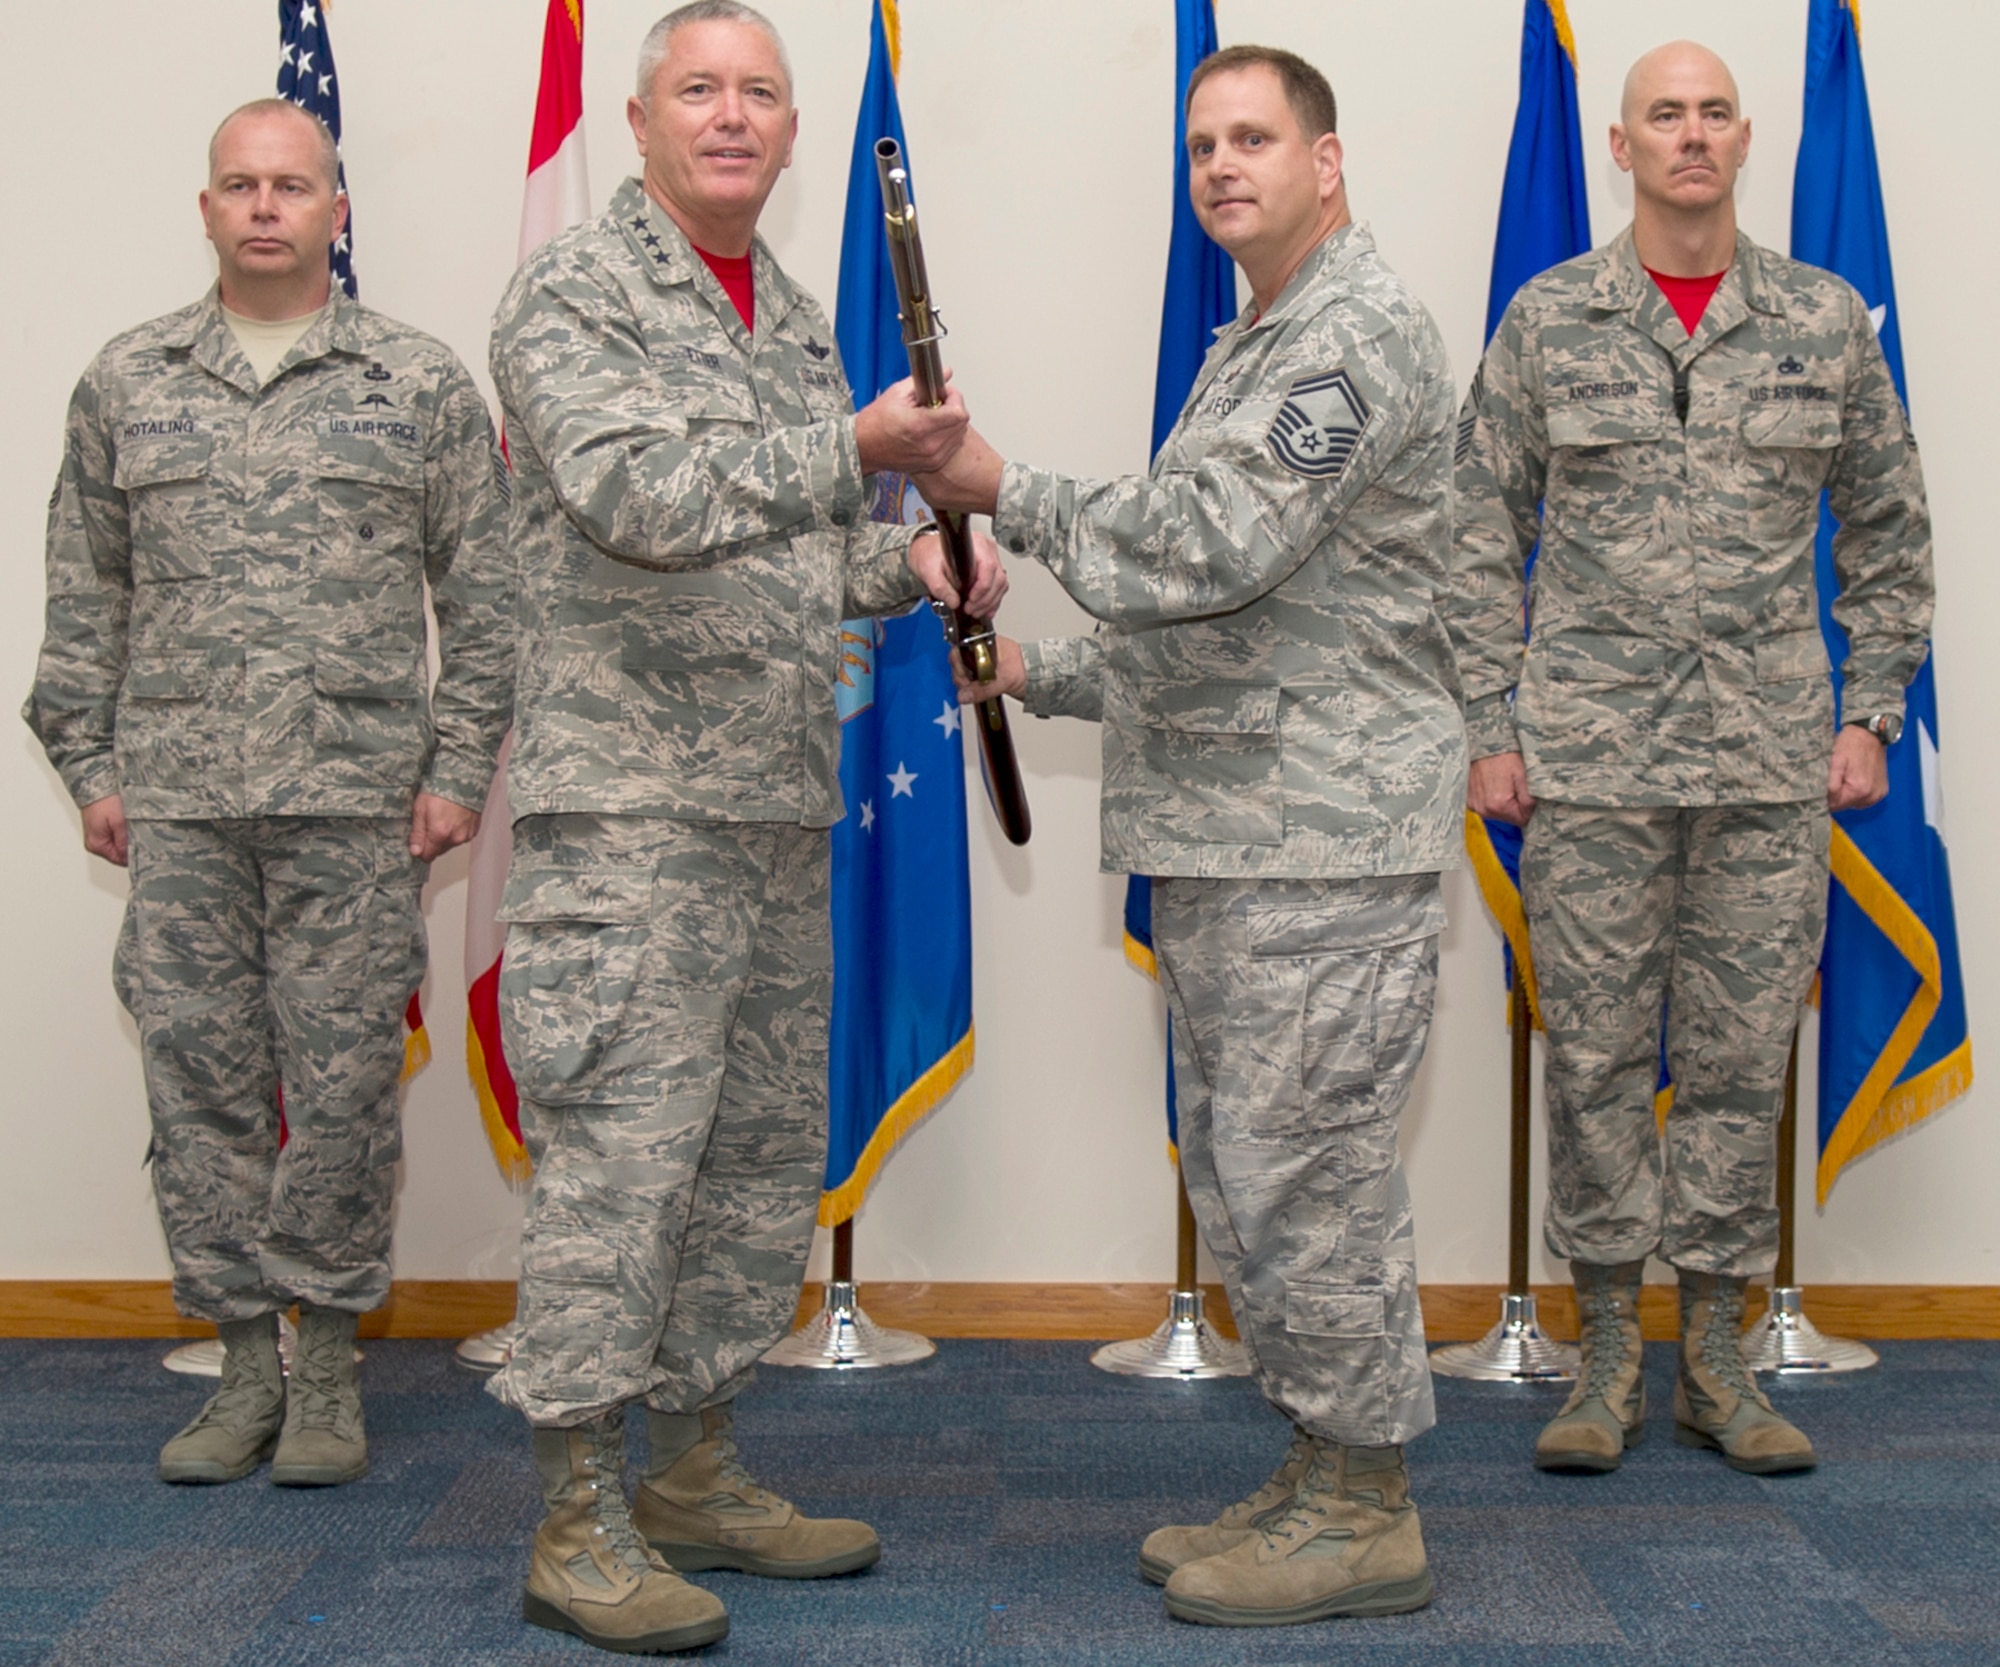 Lt. Gen. William Etter, Commander, Continental U.S. North American Aerospace Defense Region-1st Air Force (Air Forces Northern), accepts the presentation of  a 1600-era replica musket from Combined Enlisted Association member, Senior Master Sgt. Paul Williams while Chief Master Sgt. James Hotaling, Air National Guard Command Chief, (left) and Chief Master Sgt. Ronald Anderson, CONR-1st AF (AFNORTH) Command Chief, remain at attention. The CEA presented the musket to the organization as a tribute to acknowledge the nation’s military heritage and commitment to the defense of freedom. (Photo by Airman 1st Class Ty Rico Lea)